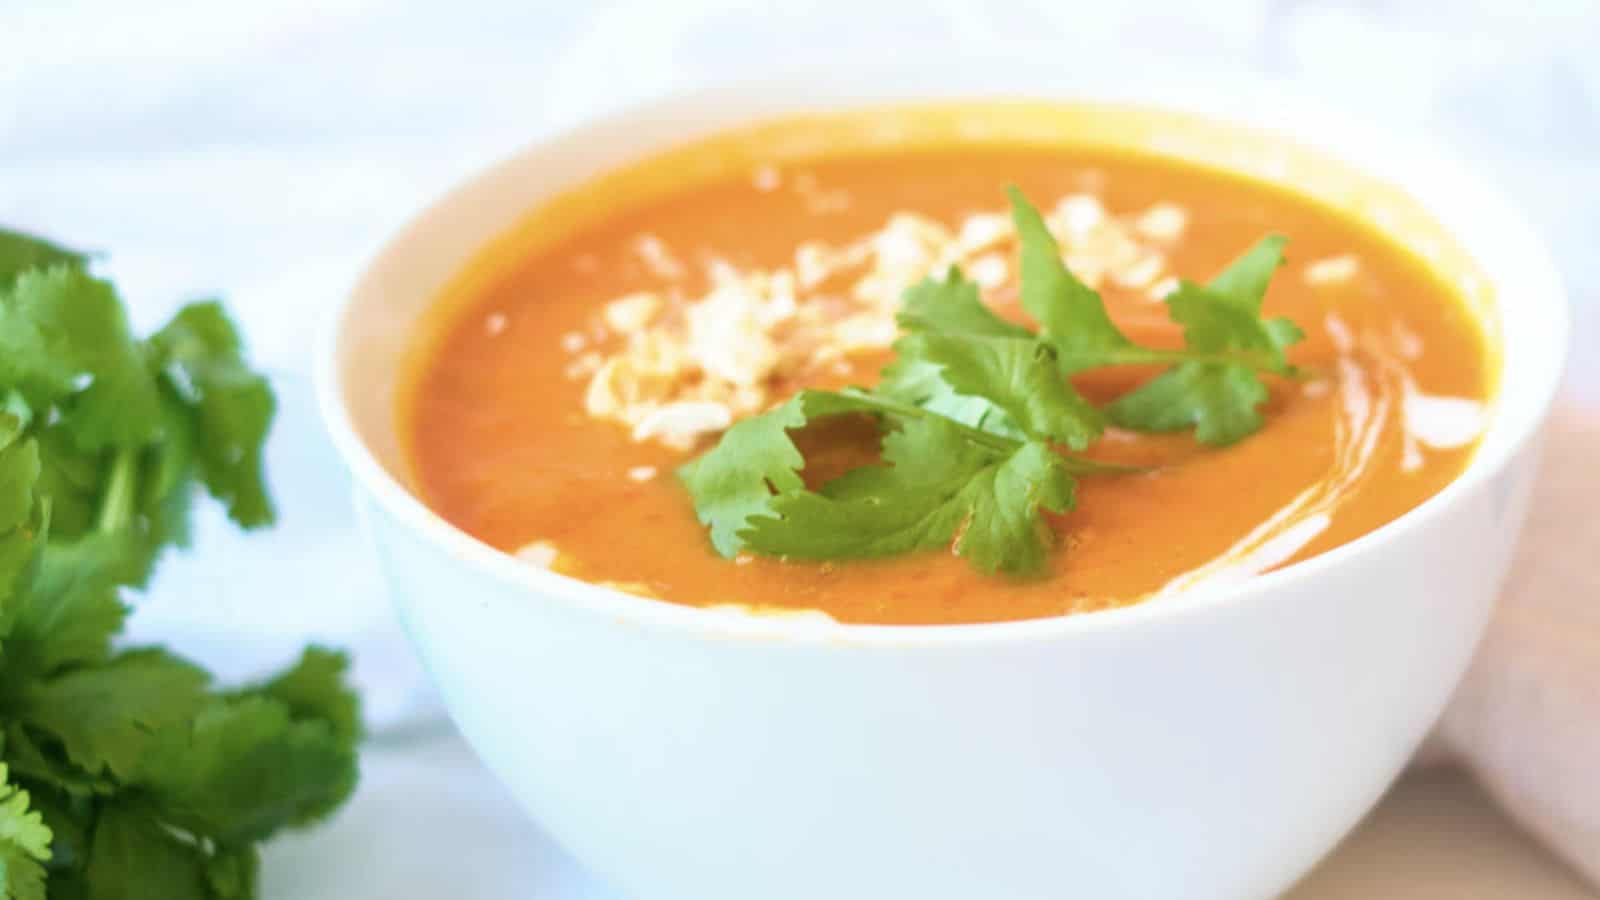 Bowl or red pepper soup.
